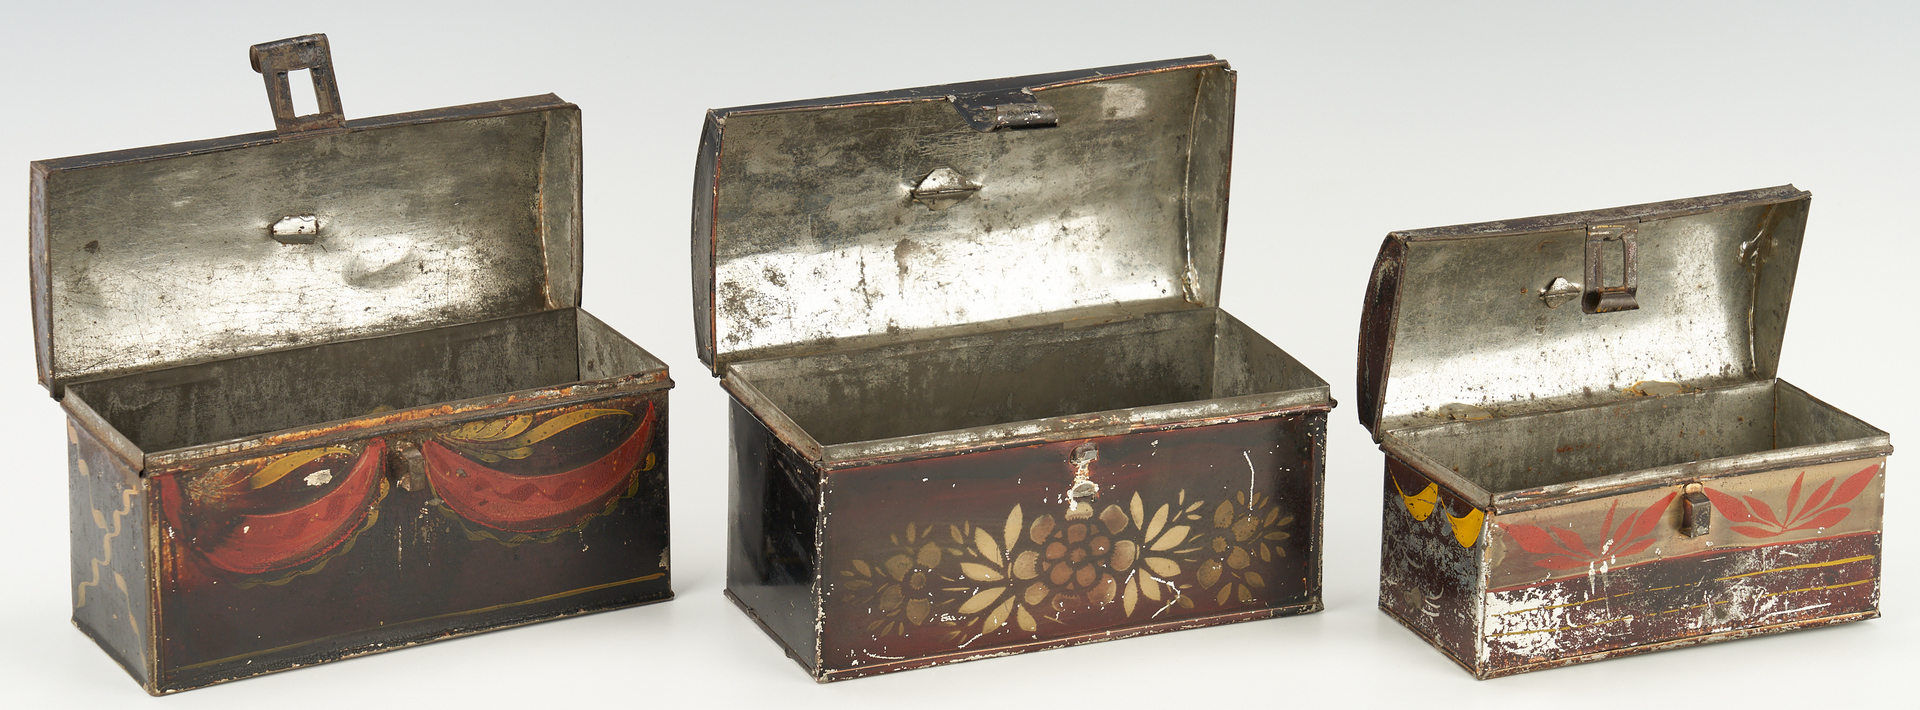 Lot 267: 6 Toleware Domed Top Boxes